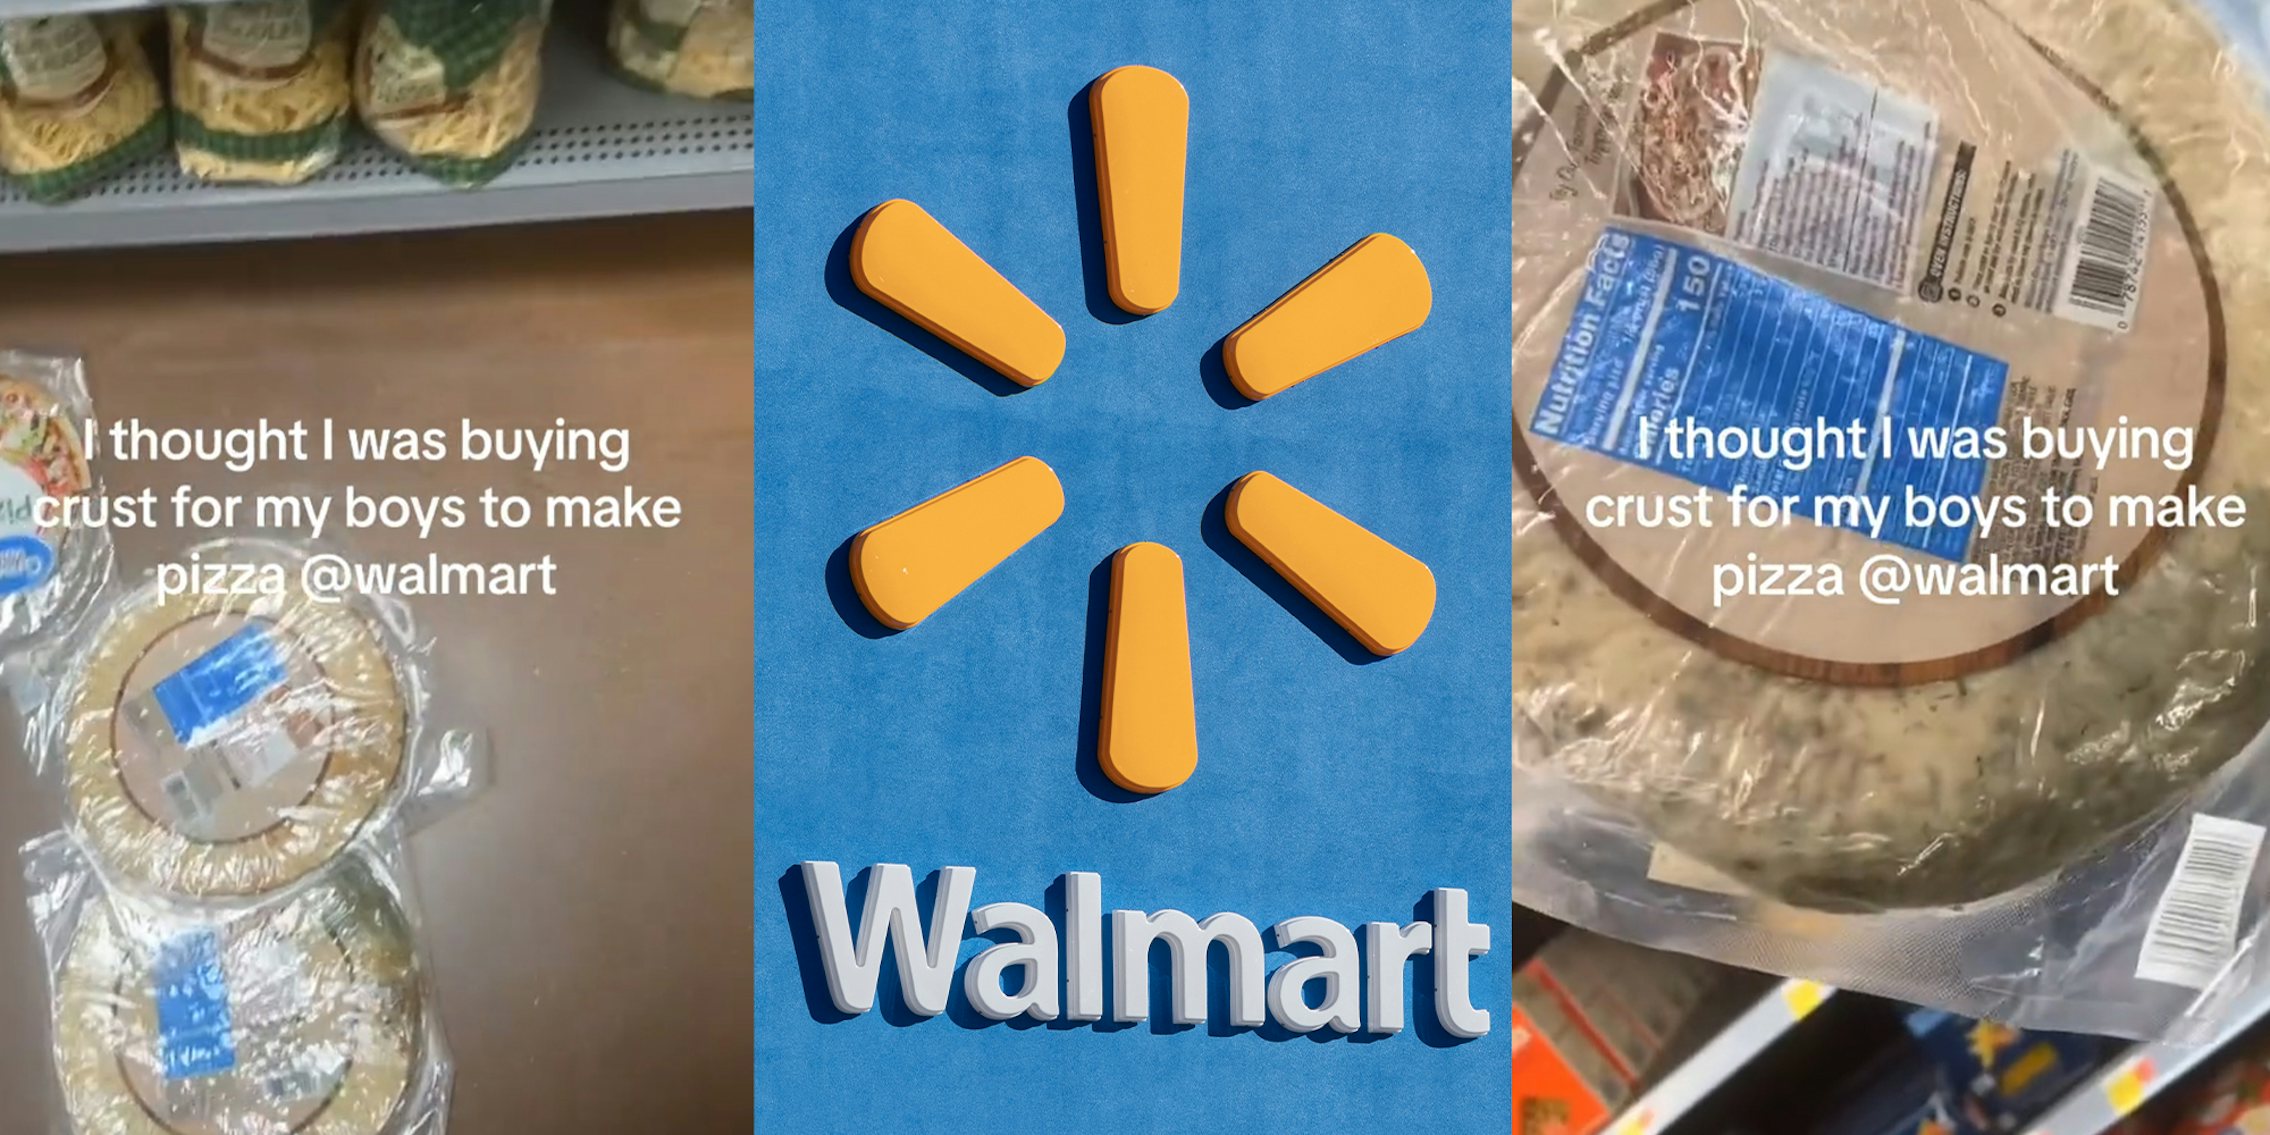 Walmart customer says she found mold on Great Value pizza crust while in the store